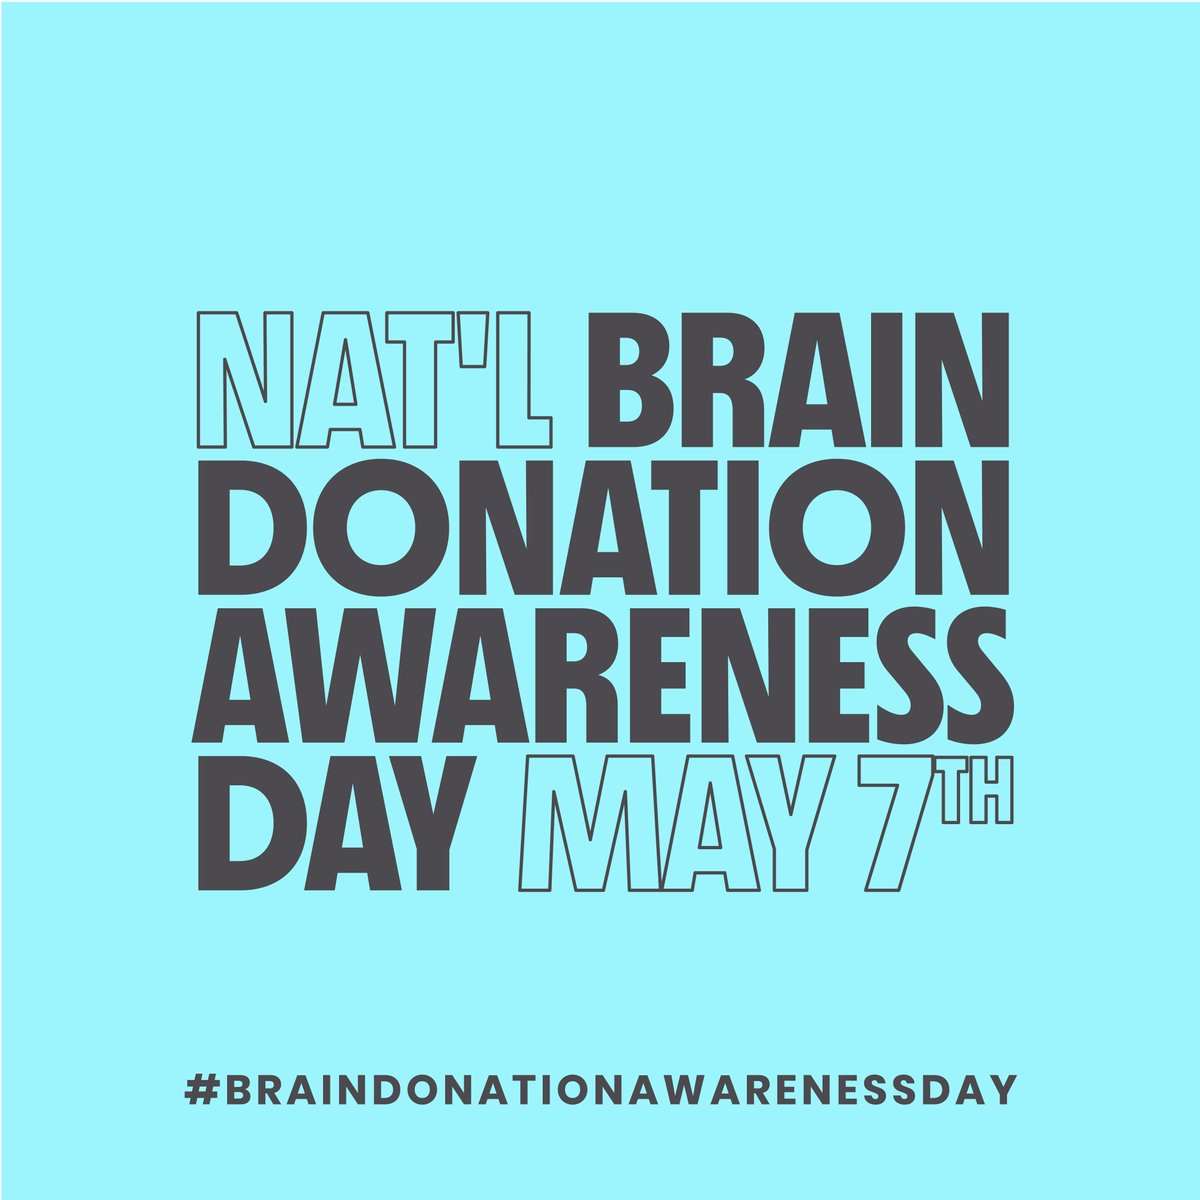 Huge THANK YOU to our partner @AmericanBrainCo and to @repblumenauer & @RepBrianFitz for reintroducing #bipartisan #HR361 to name May 7 Nat’l #BrainDonationAwarenessDay annually. Helping us raise awareness of this critical need! ow.ly/cLGY50OmOSz